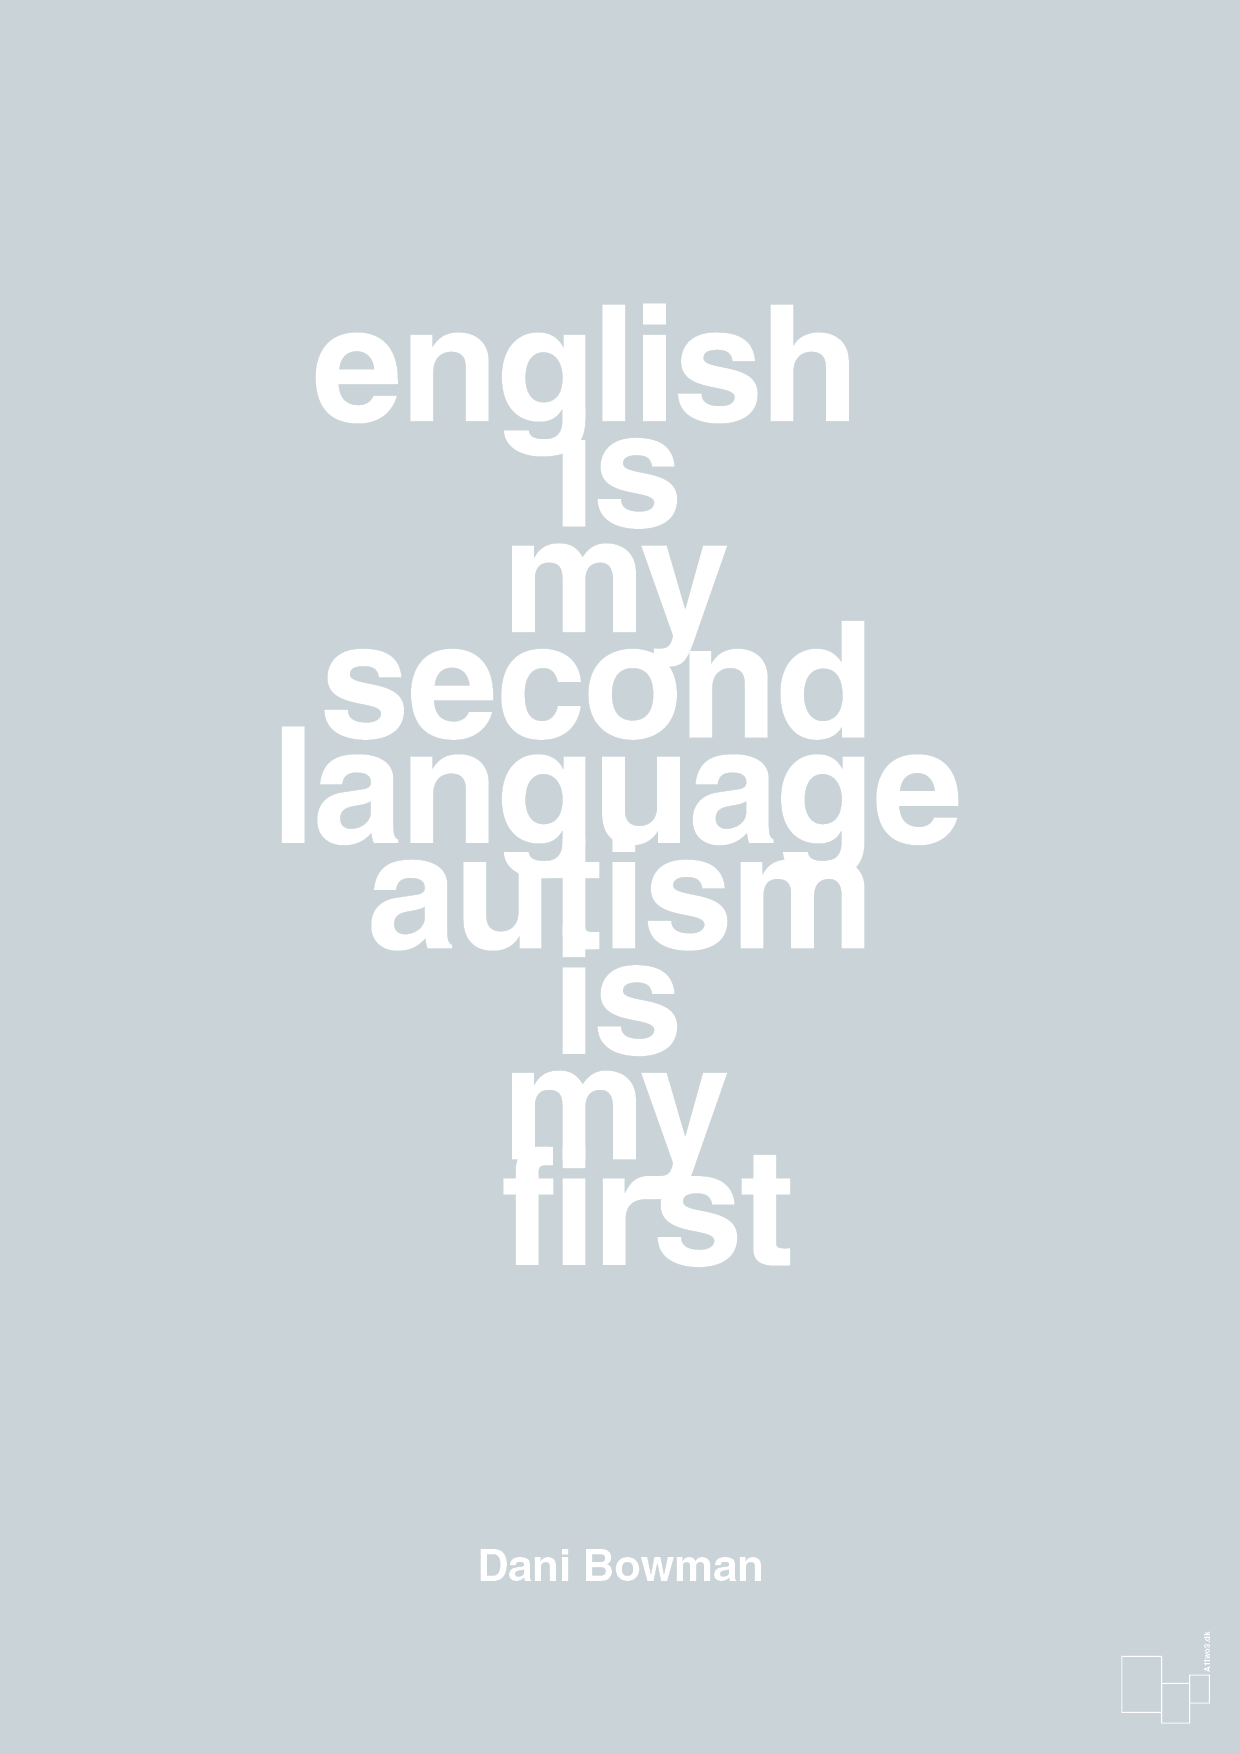 english is my second language autism is my first - Plakat med Samfund i Light Drizzle